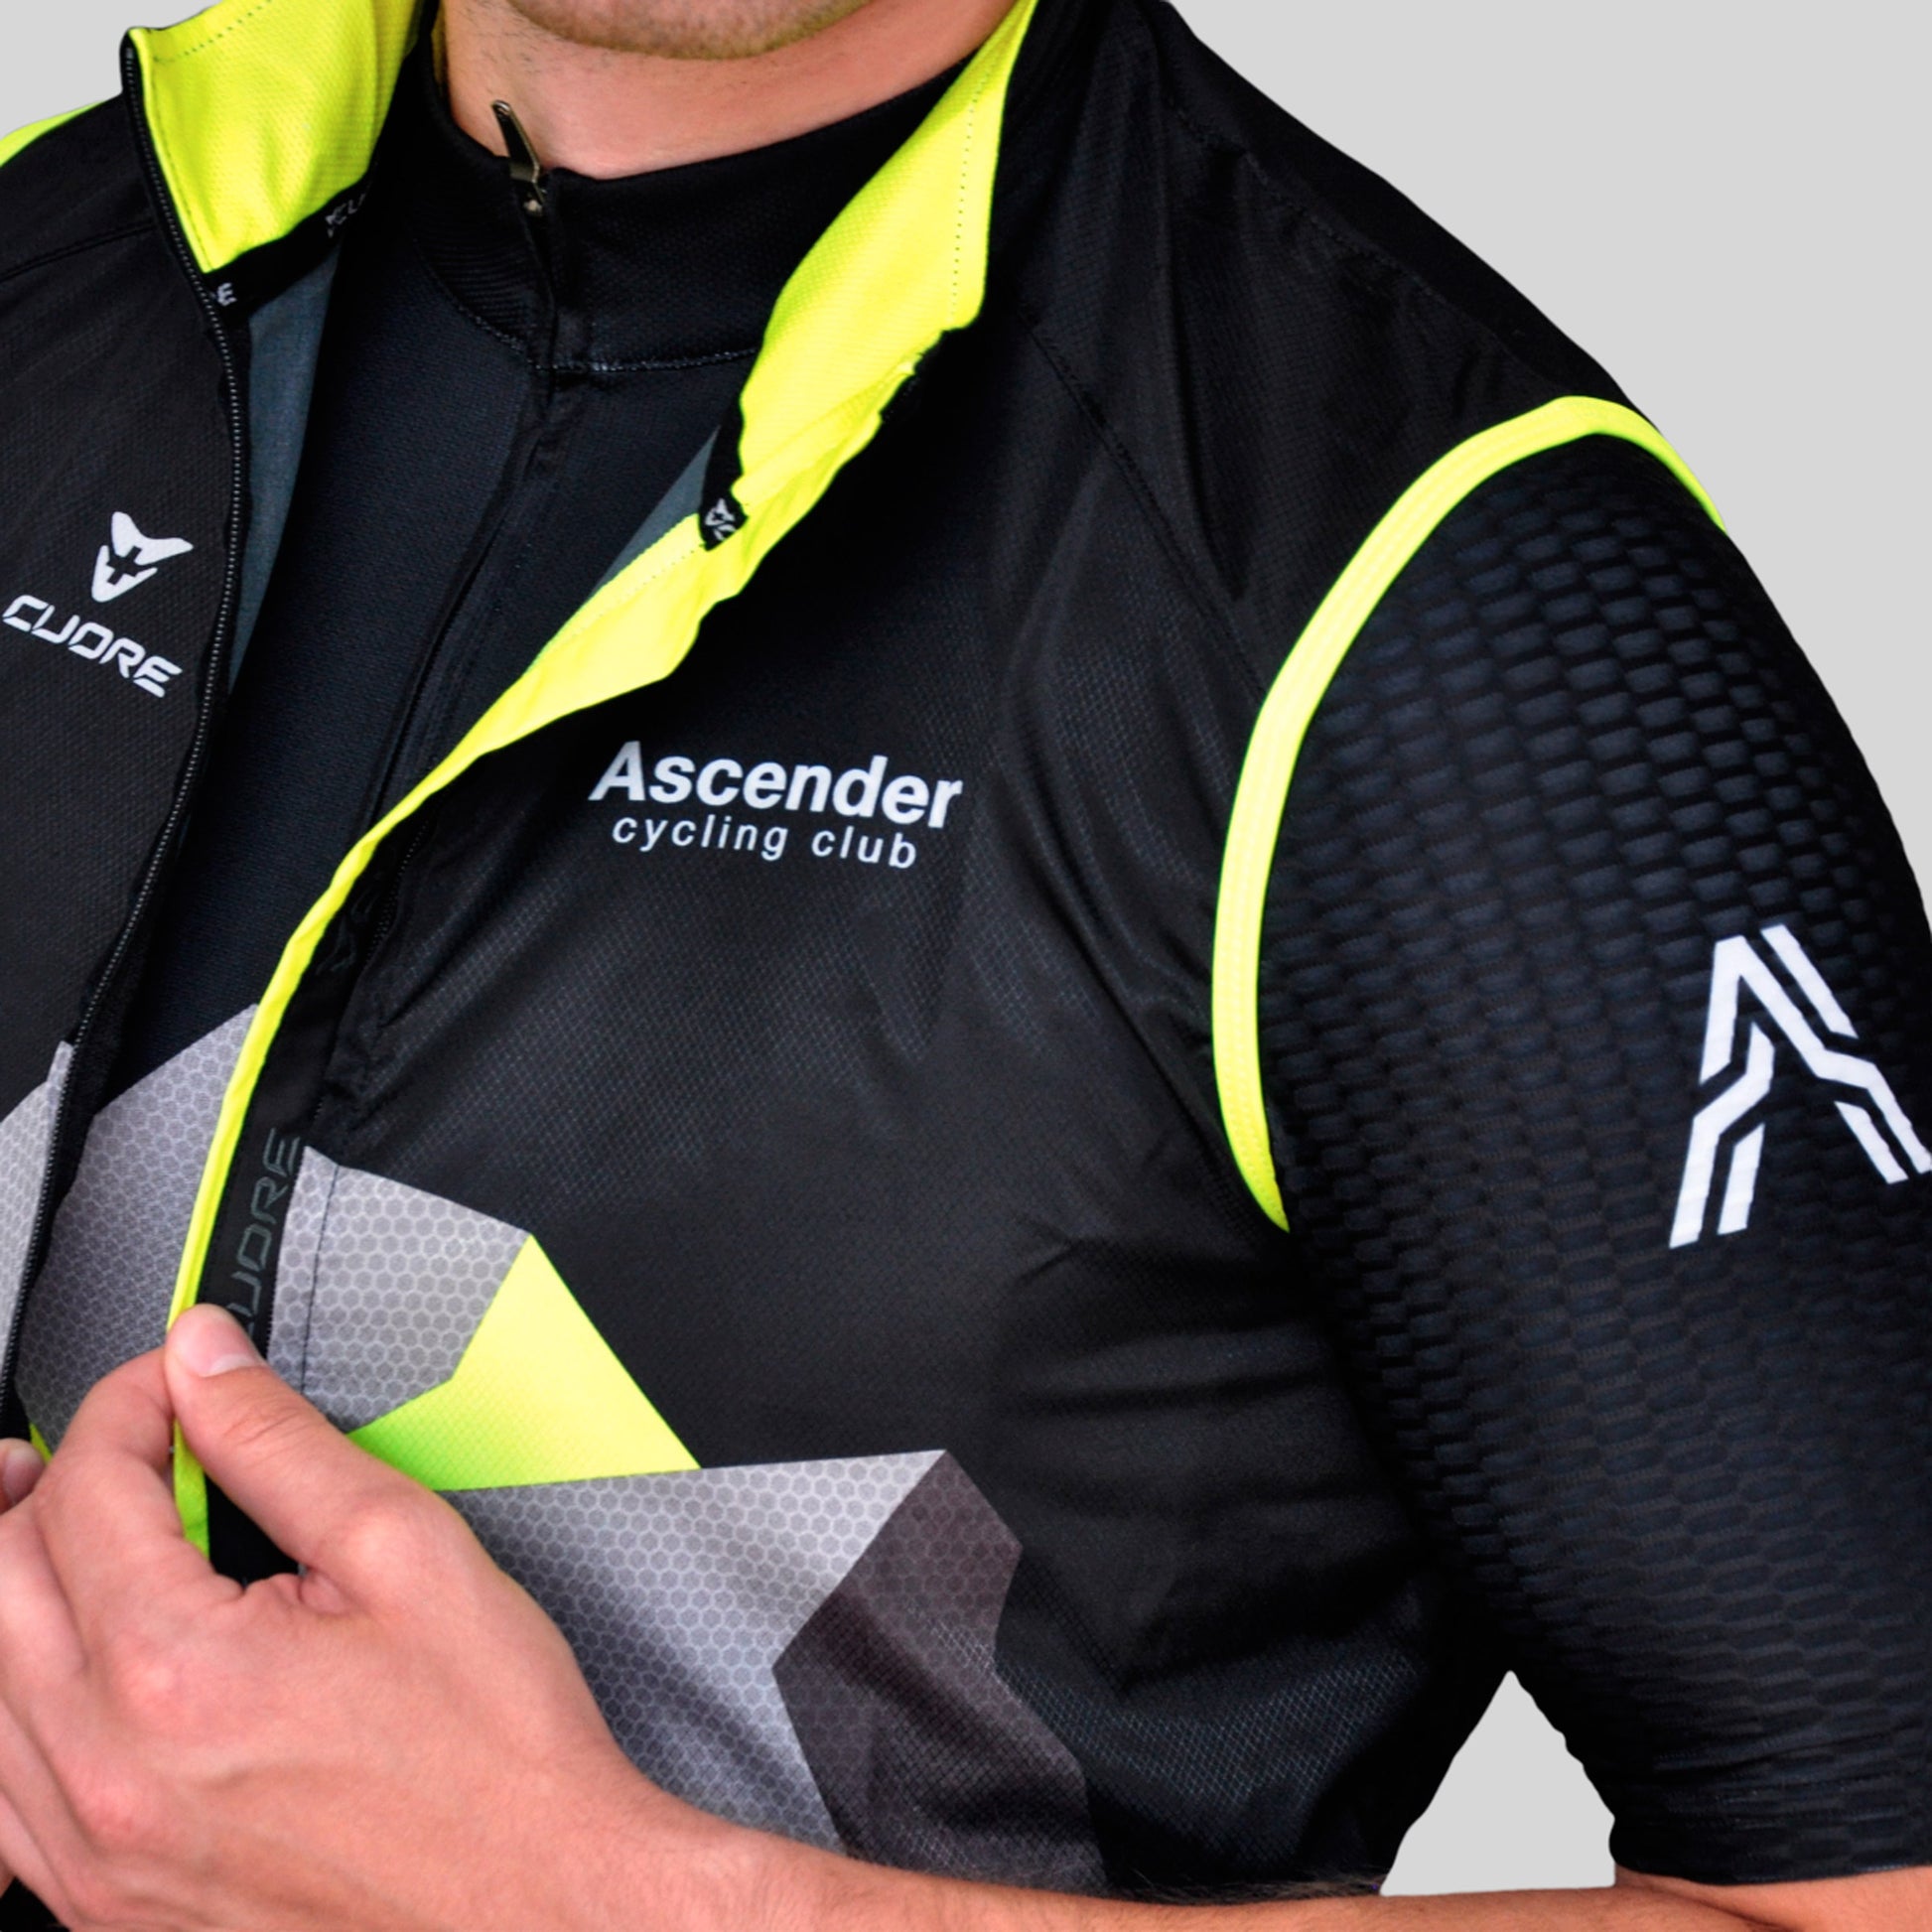 LB Camo Yellow Windshield Mesh Vest from Ascender Cycling Club and Cuore of Switzerland Detailled View